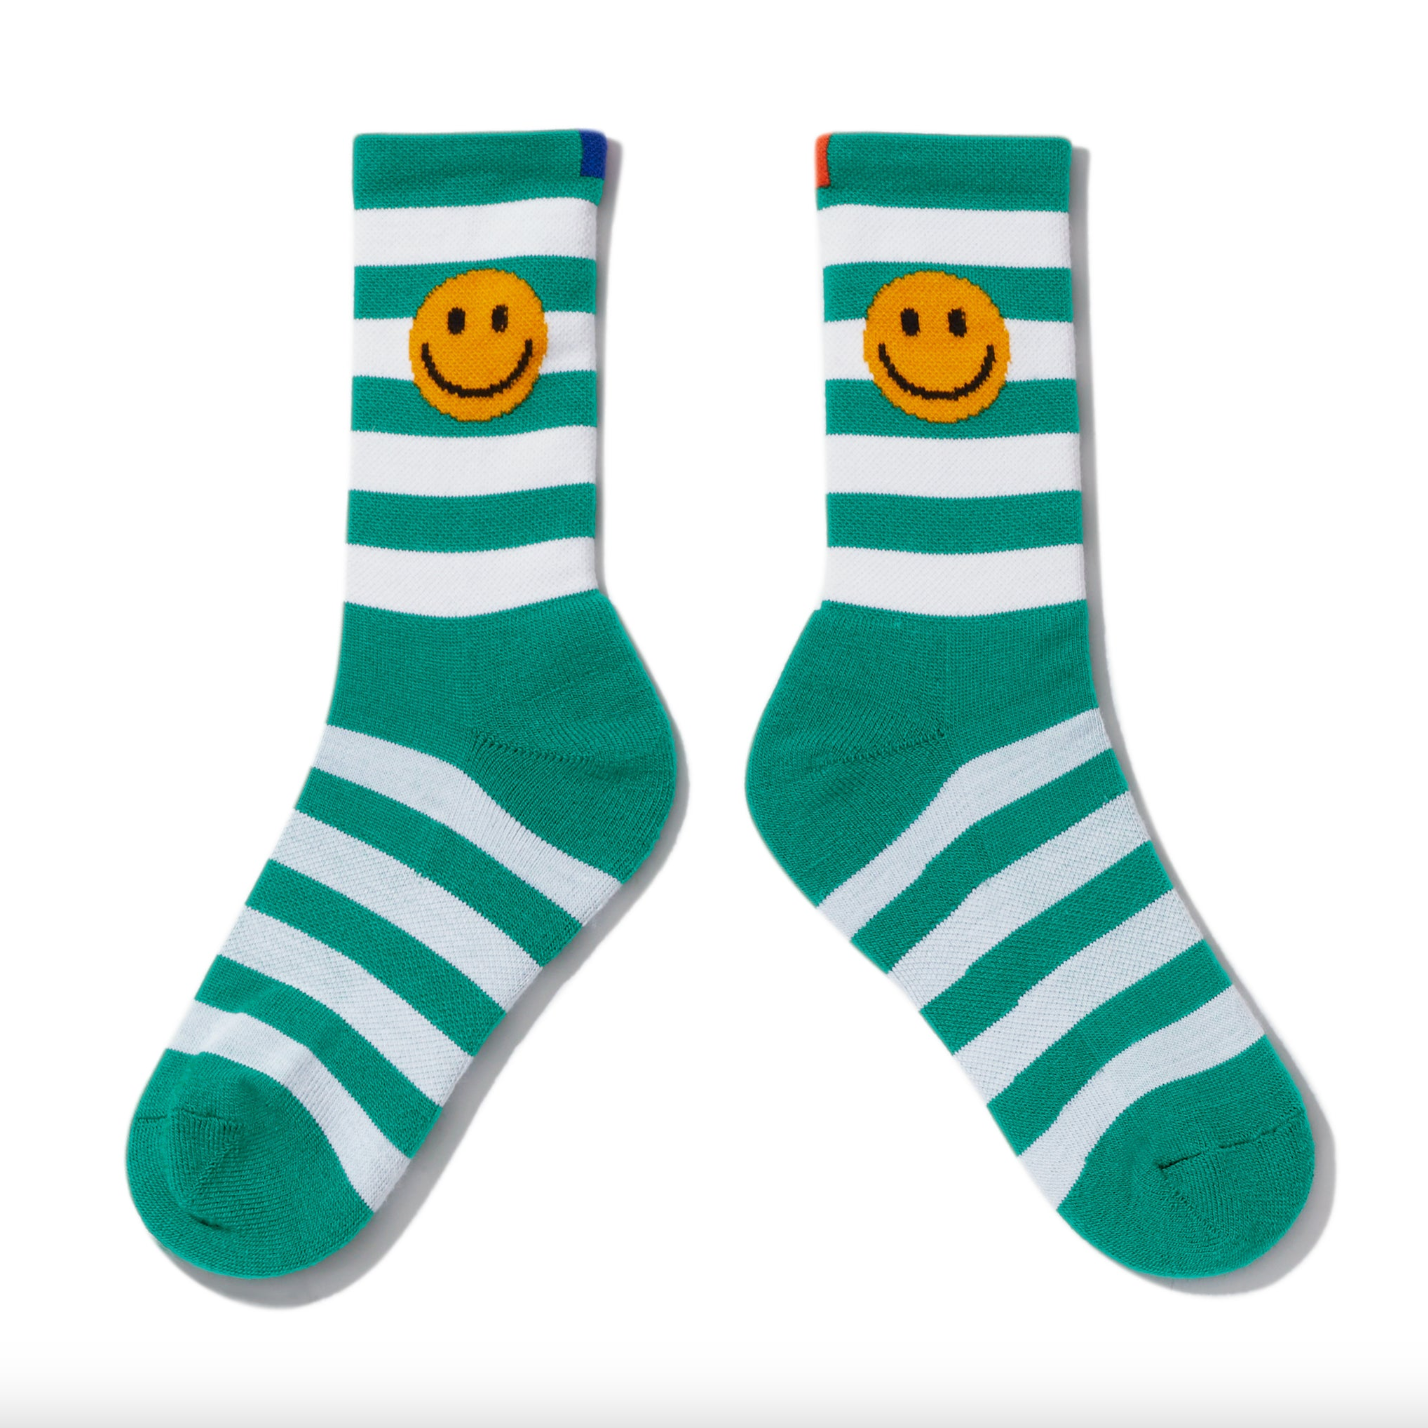 The Women's Rugby Smile Sock - Green/White